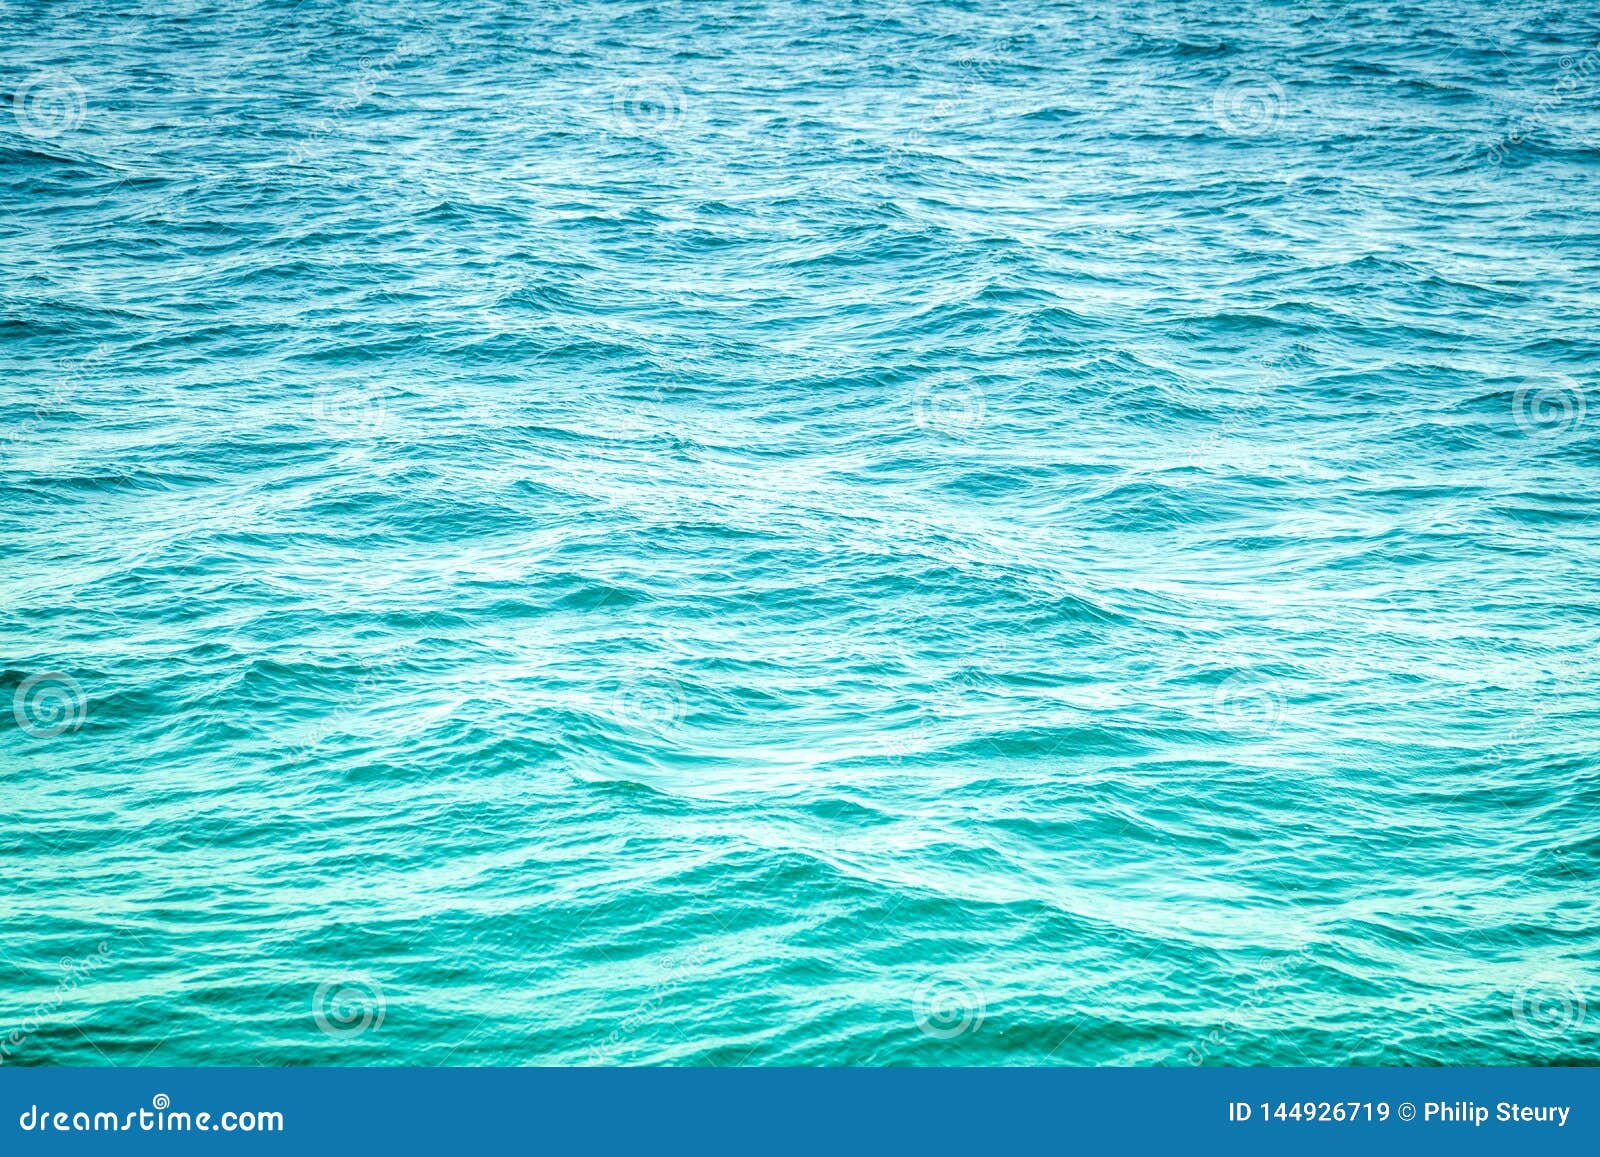 Bright Blue Ocean Water Stock Image Image Of River